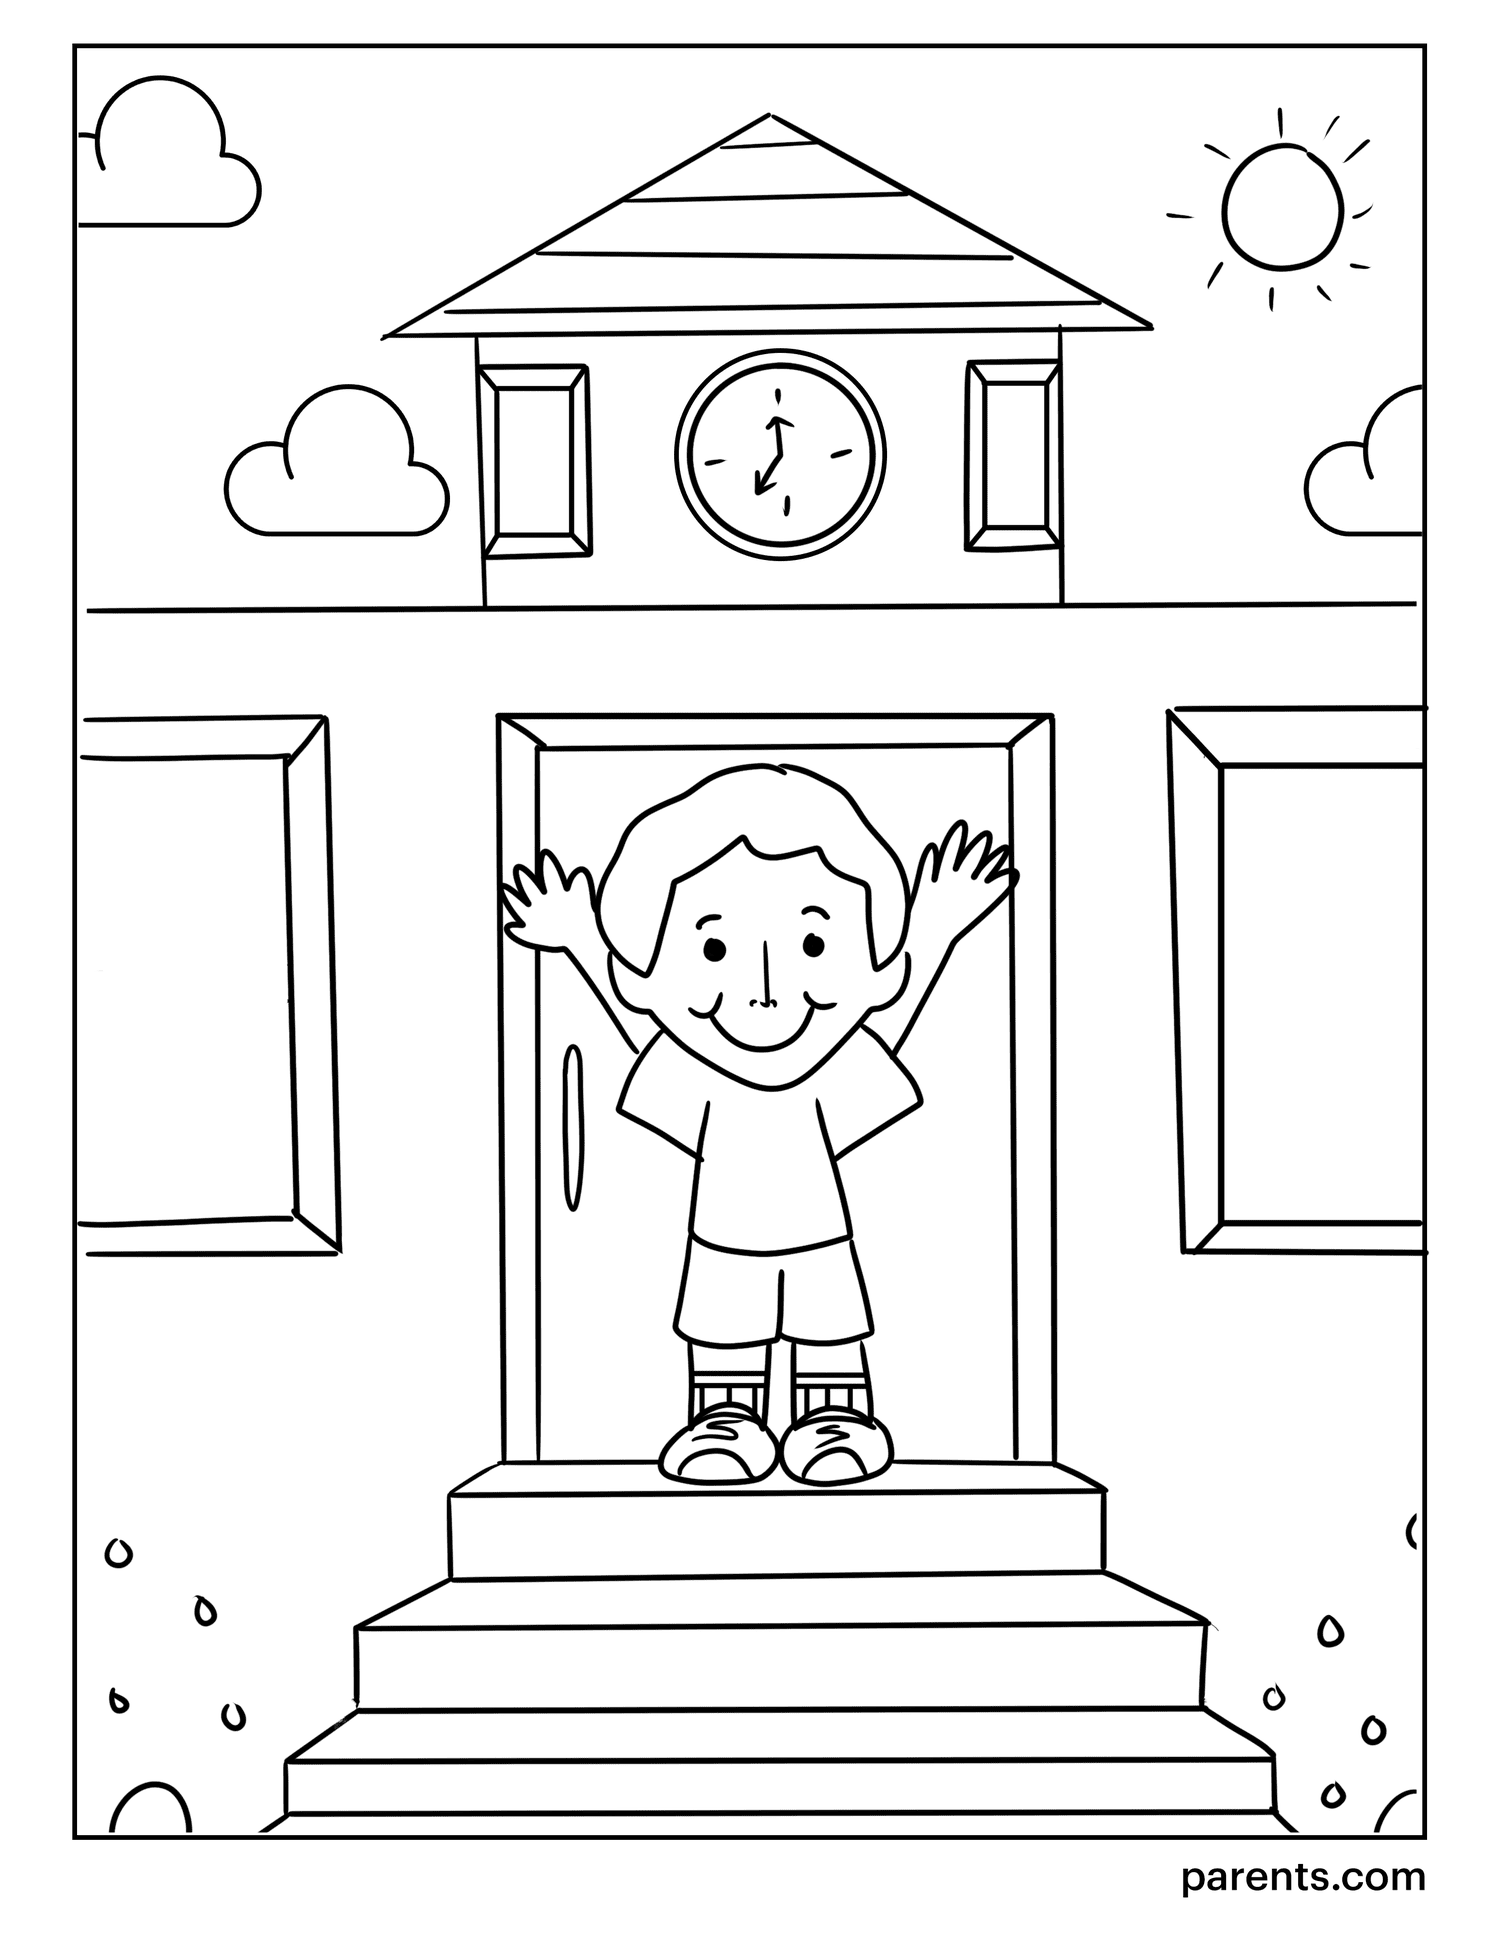 20 Printable Back to School Coloring Pages for Kids   Parents